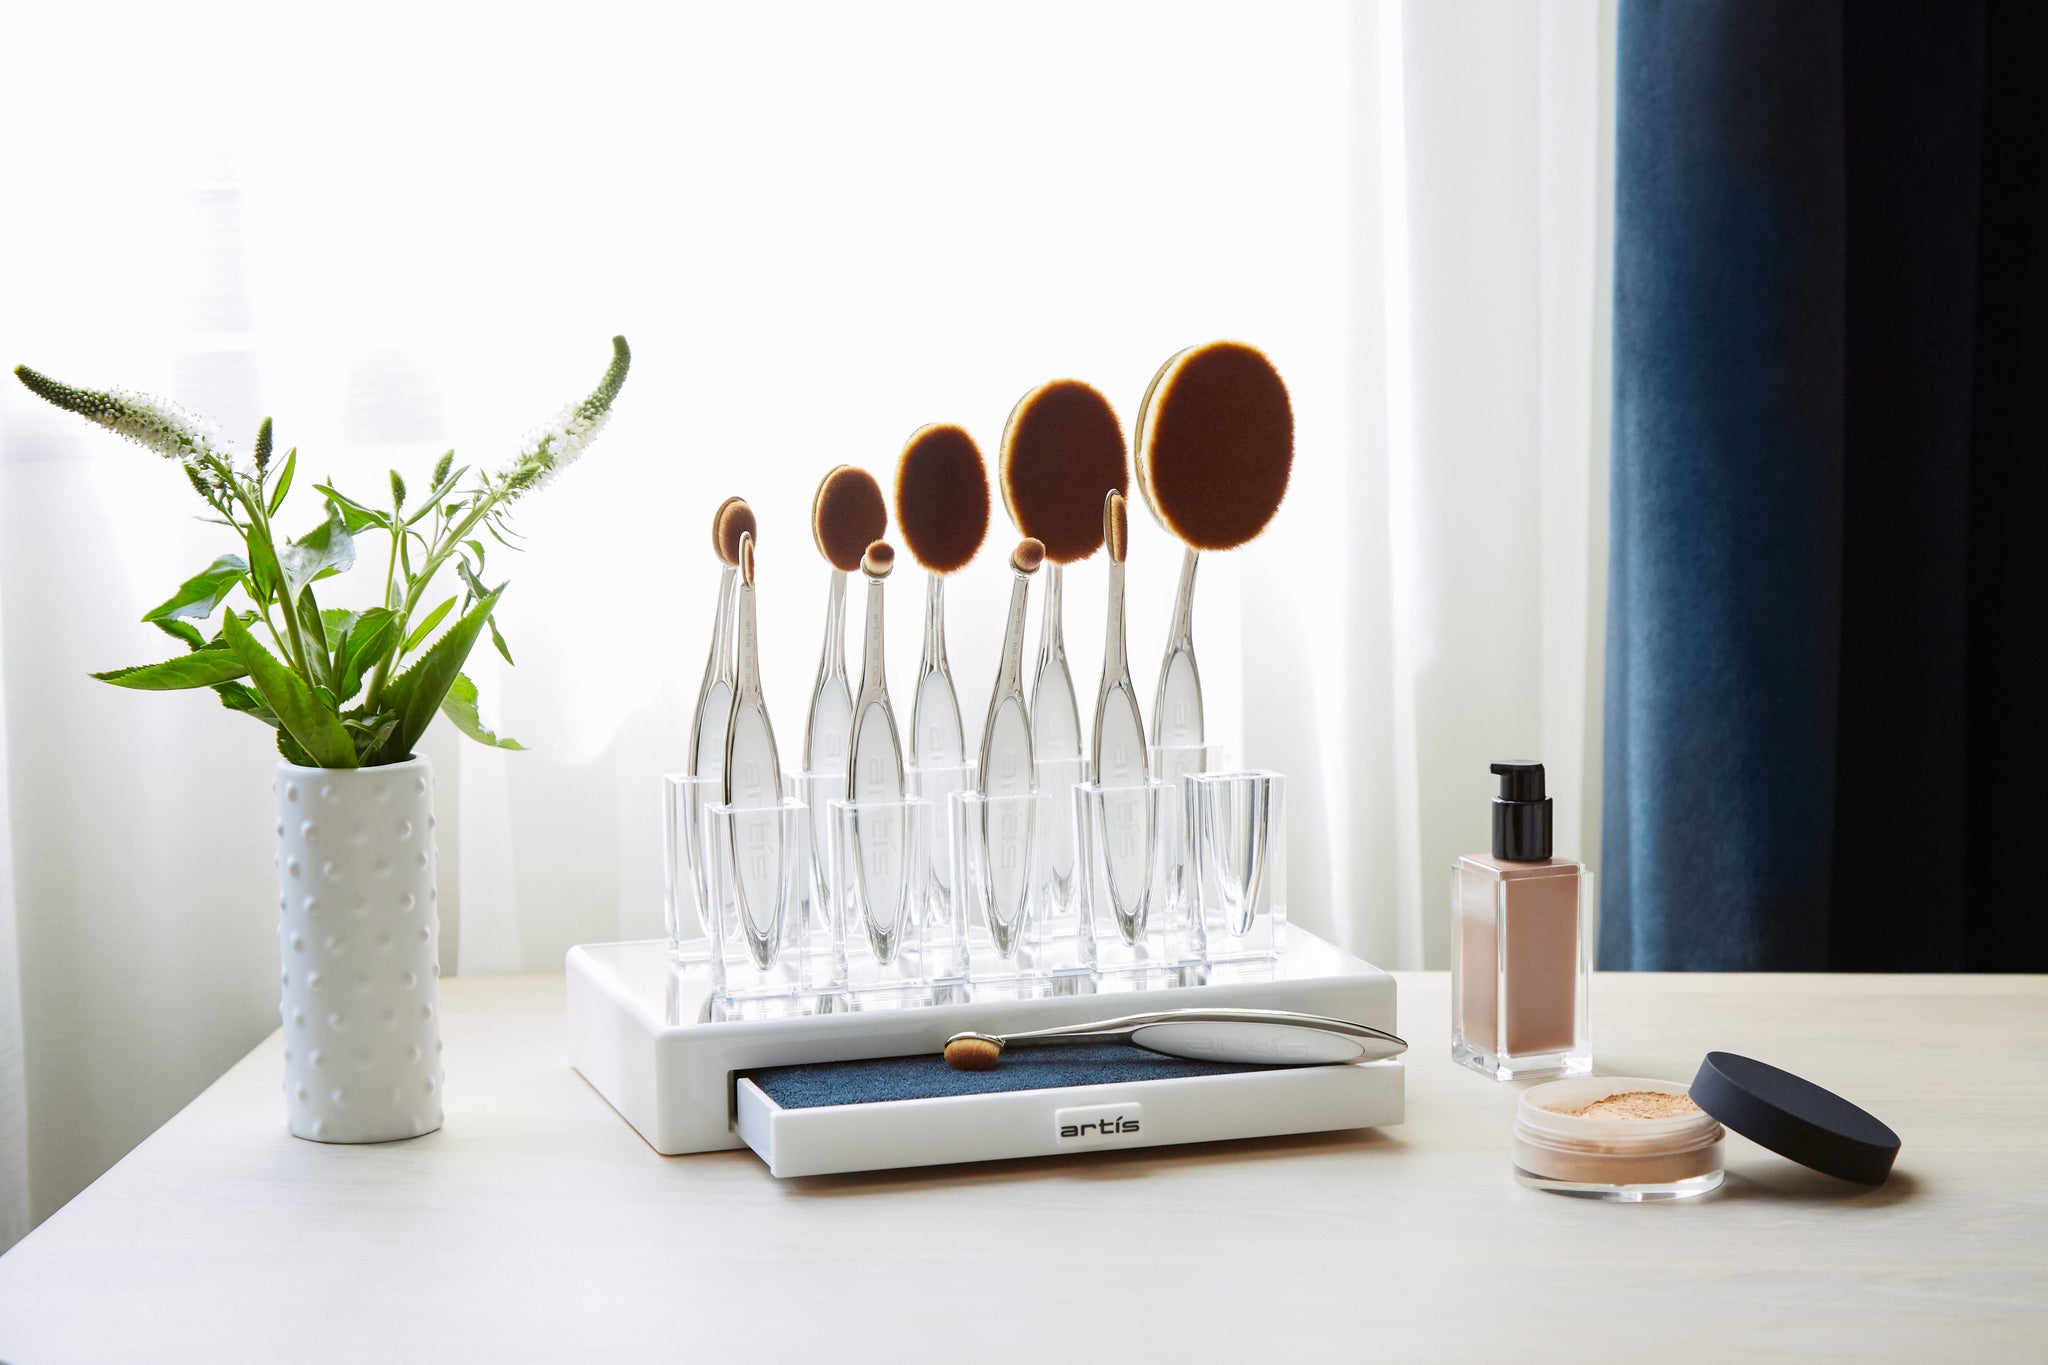 this is an image of a vanity room tabletop upon which is an Elite Collection Brush Holder Displyer unit with a drawer that slides out with a Brush Cleaning Pad. On the table is also a foundation product bottle and a jar of loose powder.